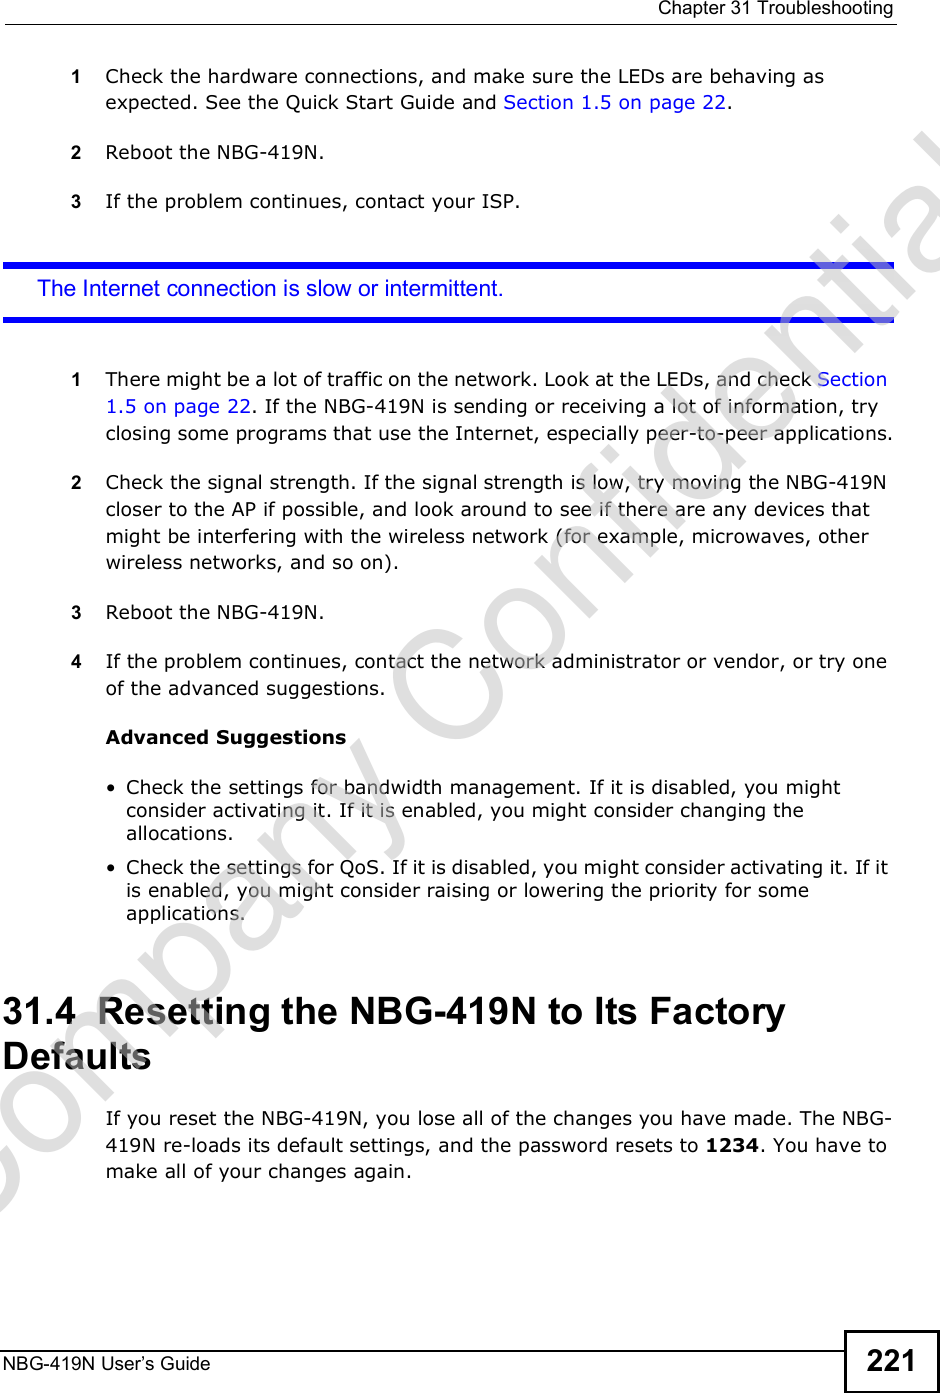  Chapter 31TroubleshootingNBG-419N User s Guide 2211Check the hardware connections, and make sure the LEDs are behaving as expected. See the Quick Start Guide and Section 1.5 on page 22. 2Reboot the NBG-419N.3If the problem continues, contact your ISP. The Internet connection is slow or intermittent.1There might be a lot of traffic on the network. Look at the LEDs, and check Section 1.5 on page 22. If the NBG-419N is sending or receiving a lot of information, try closing some programs that use the Internet, especially peer-to-peer applications.2Check the signal strength. If the signal strength is low, try moving the NBG-419N closer to the AP if possible, and look around to see if there are any devices that might be interfering with the wireless network (for example, microwaves, other wireless networks, and so on).3Reboot the NBG-419N.4If the problem continues, contact the network administrator or vendor, or try one of the advanced suggestions.Advanced Suggestions Check the settings for bandwidth management. If it is disabled, you might consider activating it. If it is enabled, you might consider changing the allocations.  Check the settings for QoS. If it is disabled, you might consider activating it. If it is enabled, you might consider raising or lowering the priority for some applications.31.4  Resetting the NBG-419N to Its Factory Defaults If you reset the NBG-419N, you lose all of the changes you have made. The NBG-419N re-loads its default settings, and the password resets to 1234. You have to make all of your changes again.Company Confidential